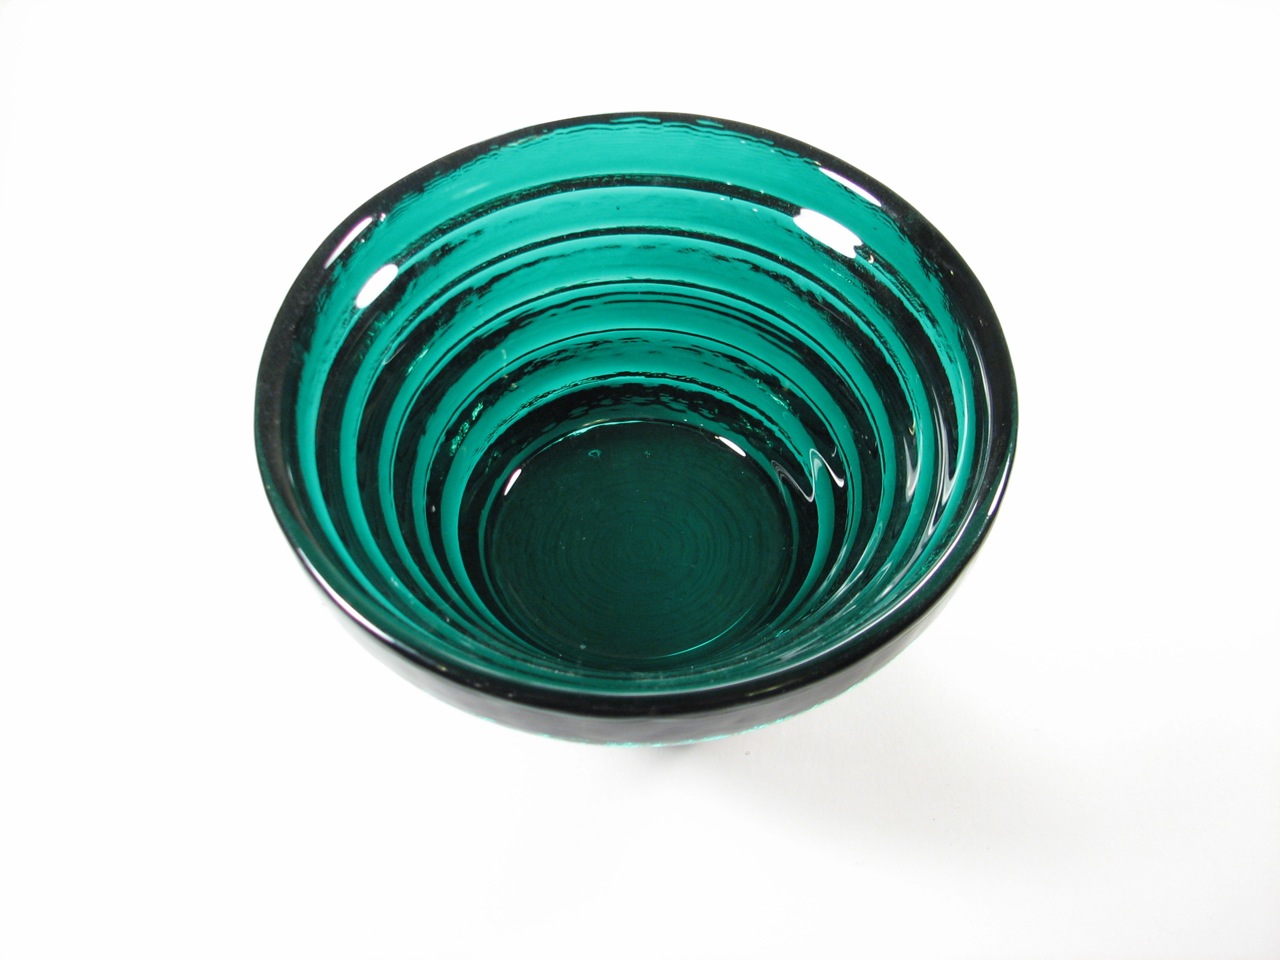 Photo of a bowl which has ridges around it at different heights. Its interior is not smooth, but ridged. The ridges are parallel to each other at different heights.